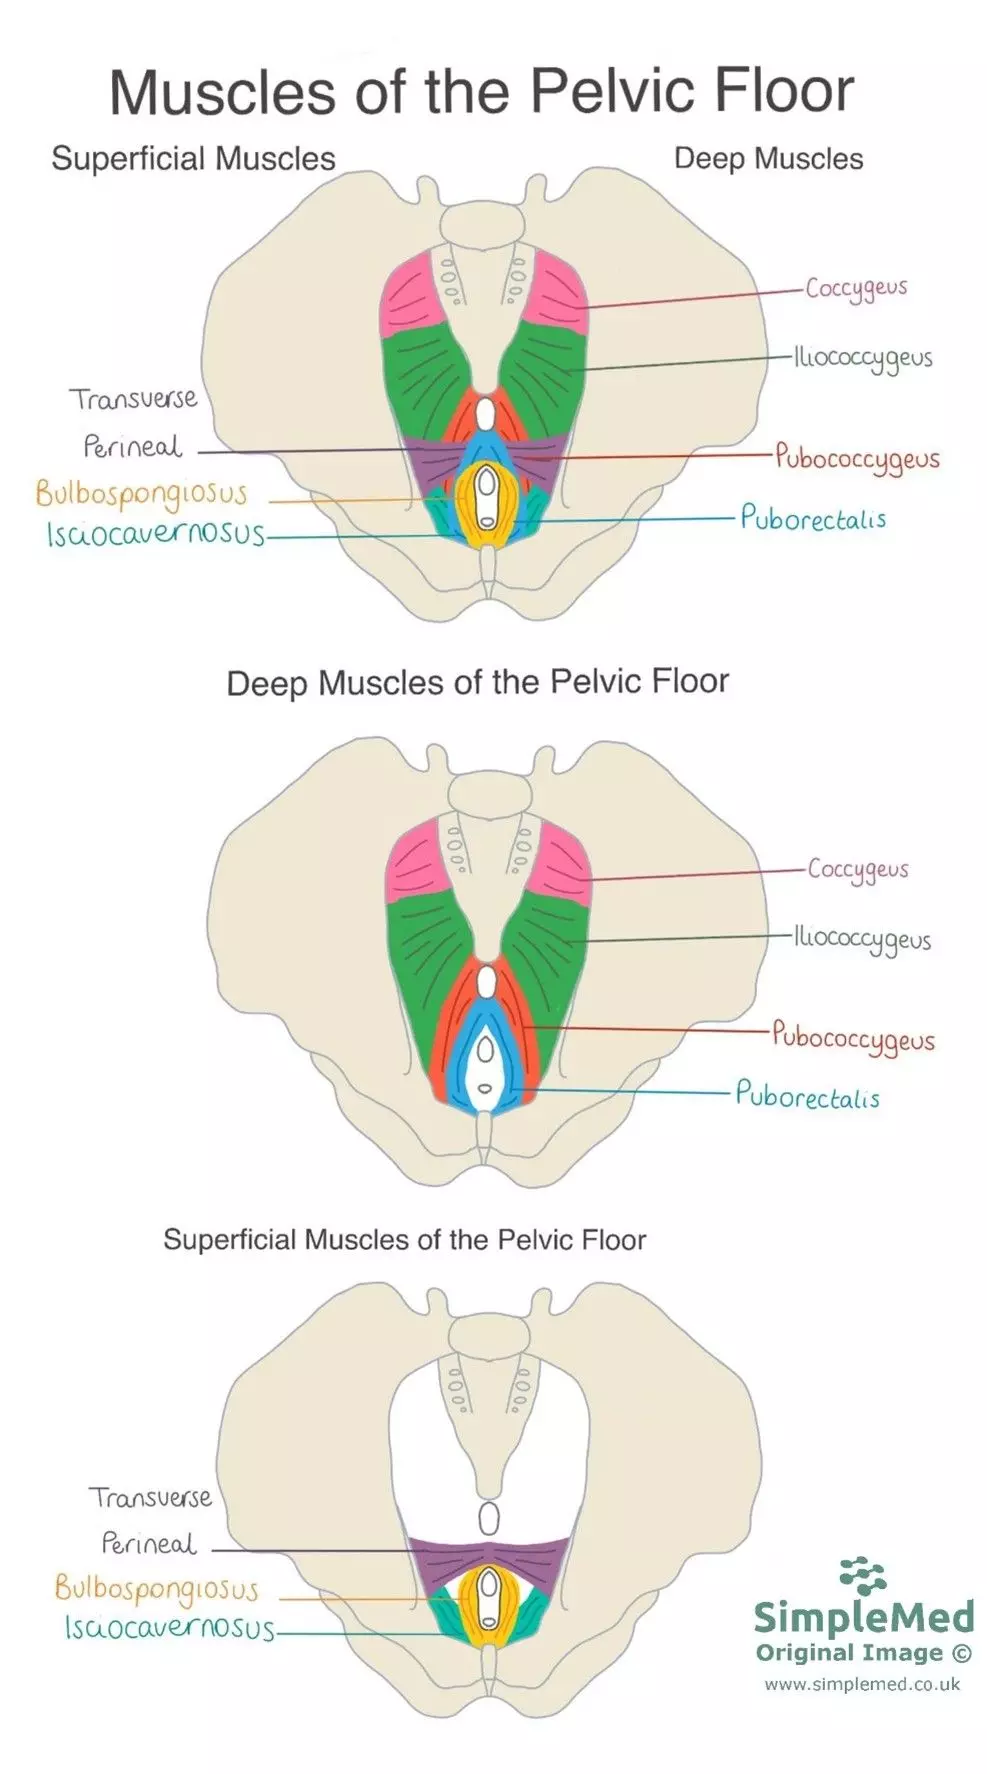 Muscles of the Pelvic Floor SimpleMed